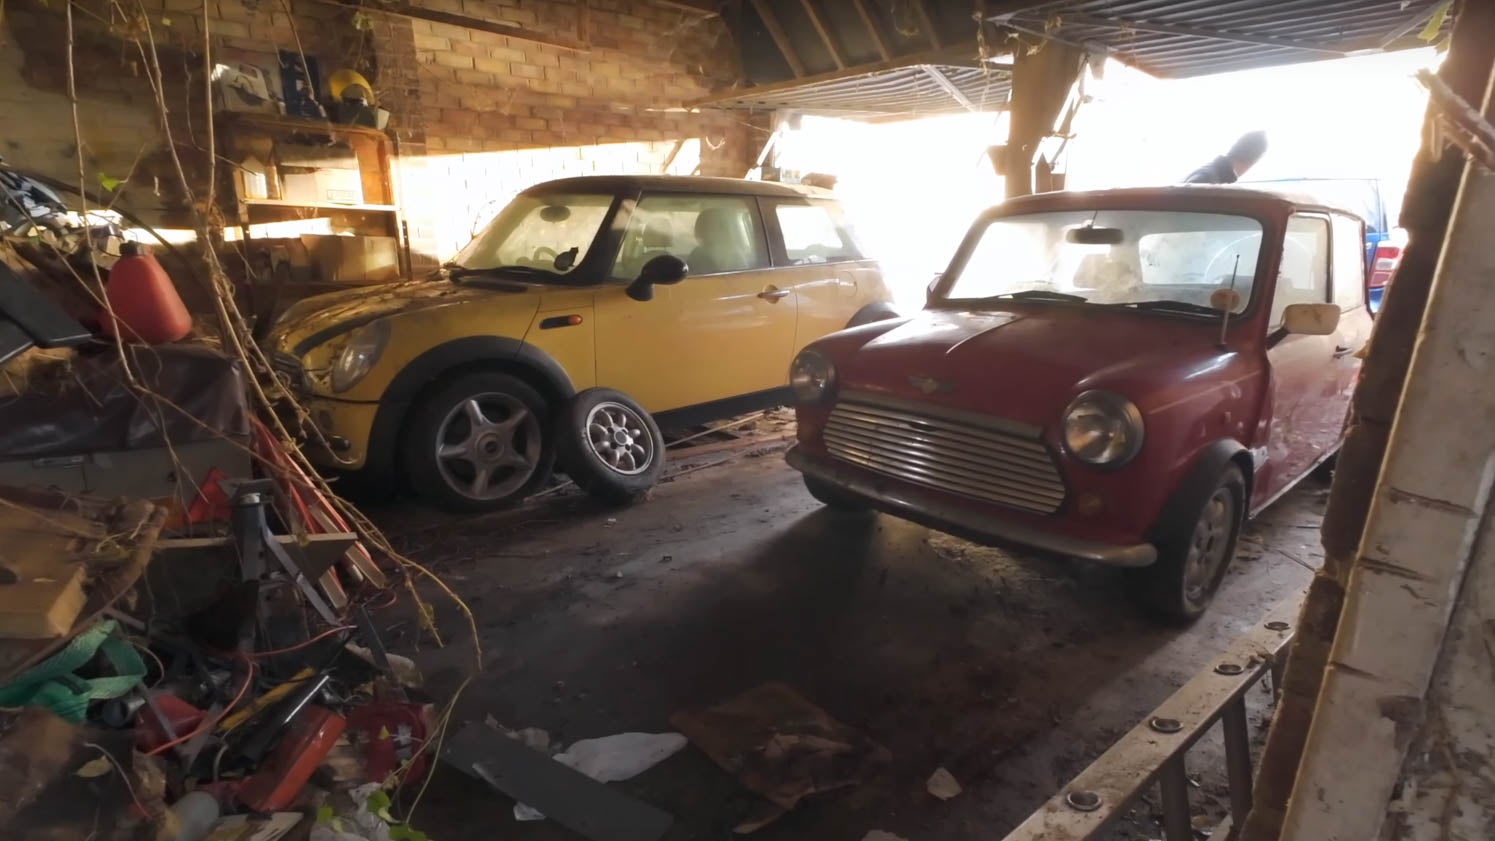 Two Mini Coopers found in a barn were finally rescued from their overgrown garage.